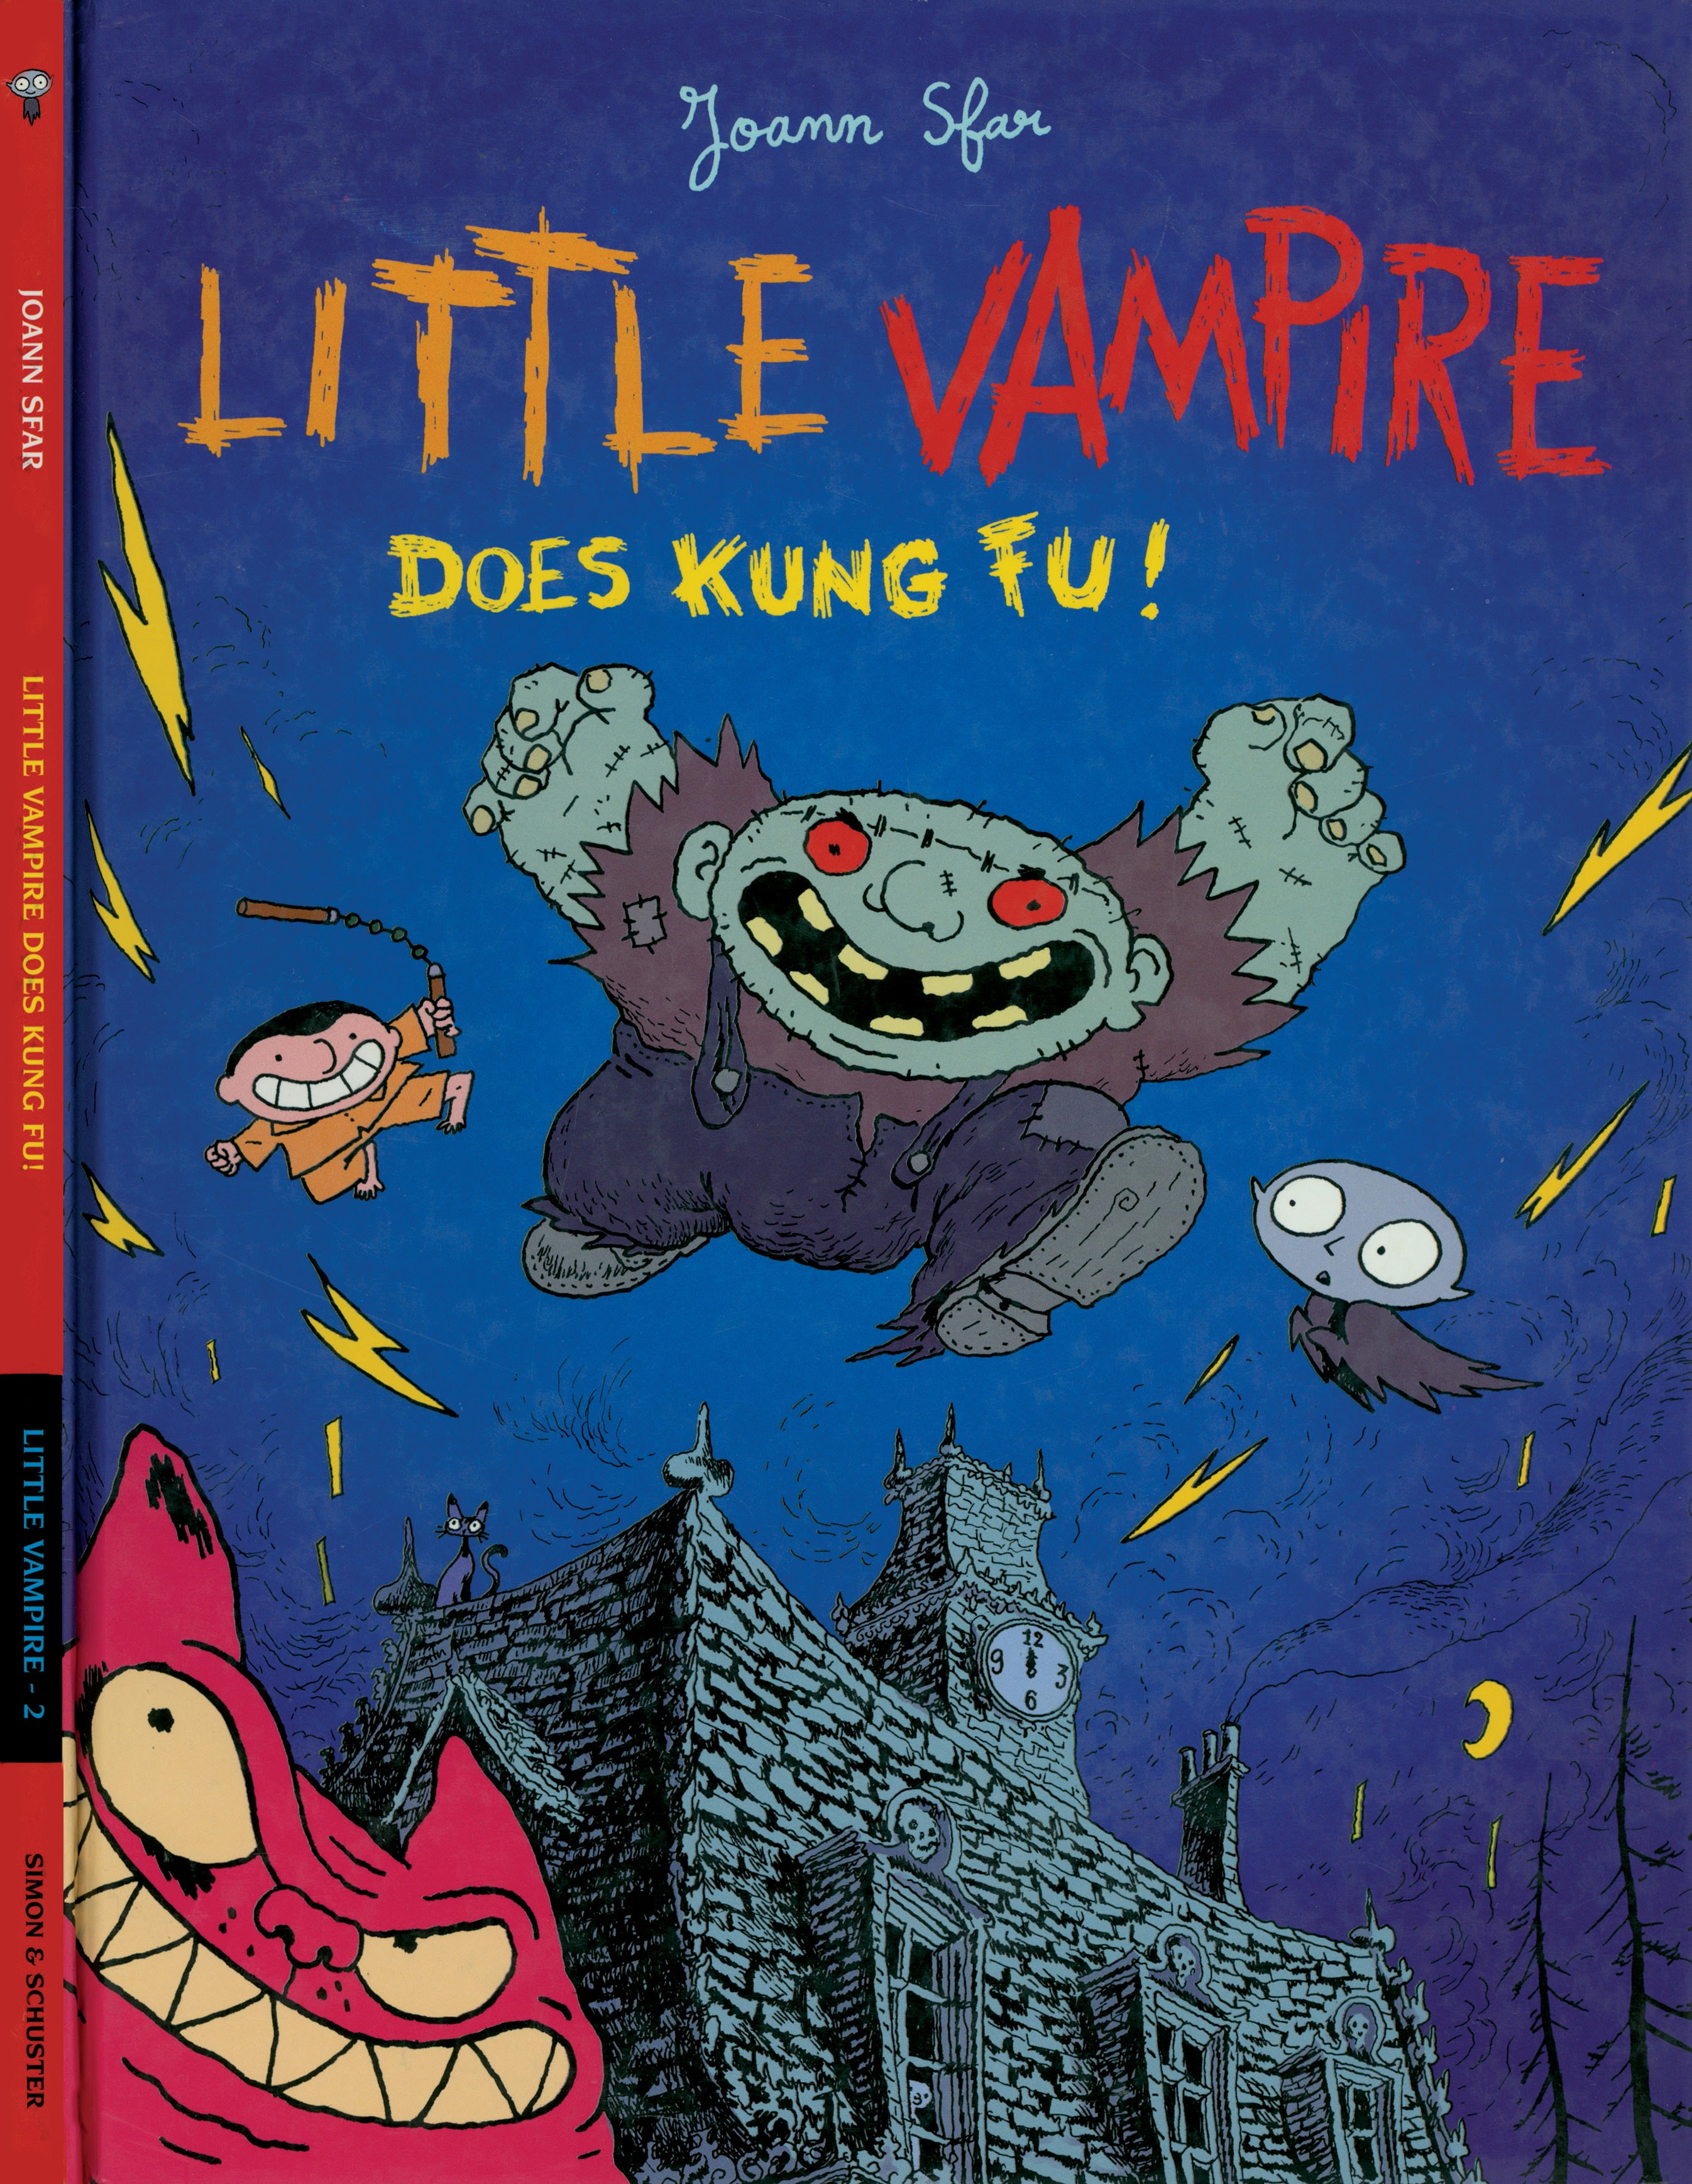 Little Vampire Issue 2 | Read Little Vampire Issue 2 comic online in high  quality. Read Full Comic online for free - Read comics online in high  quality .| READ COMIC ONLINE